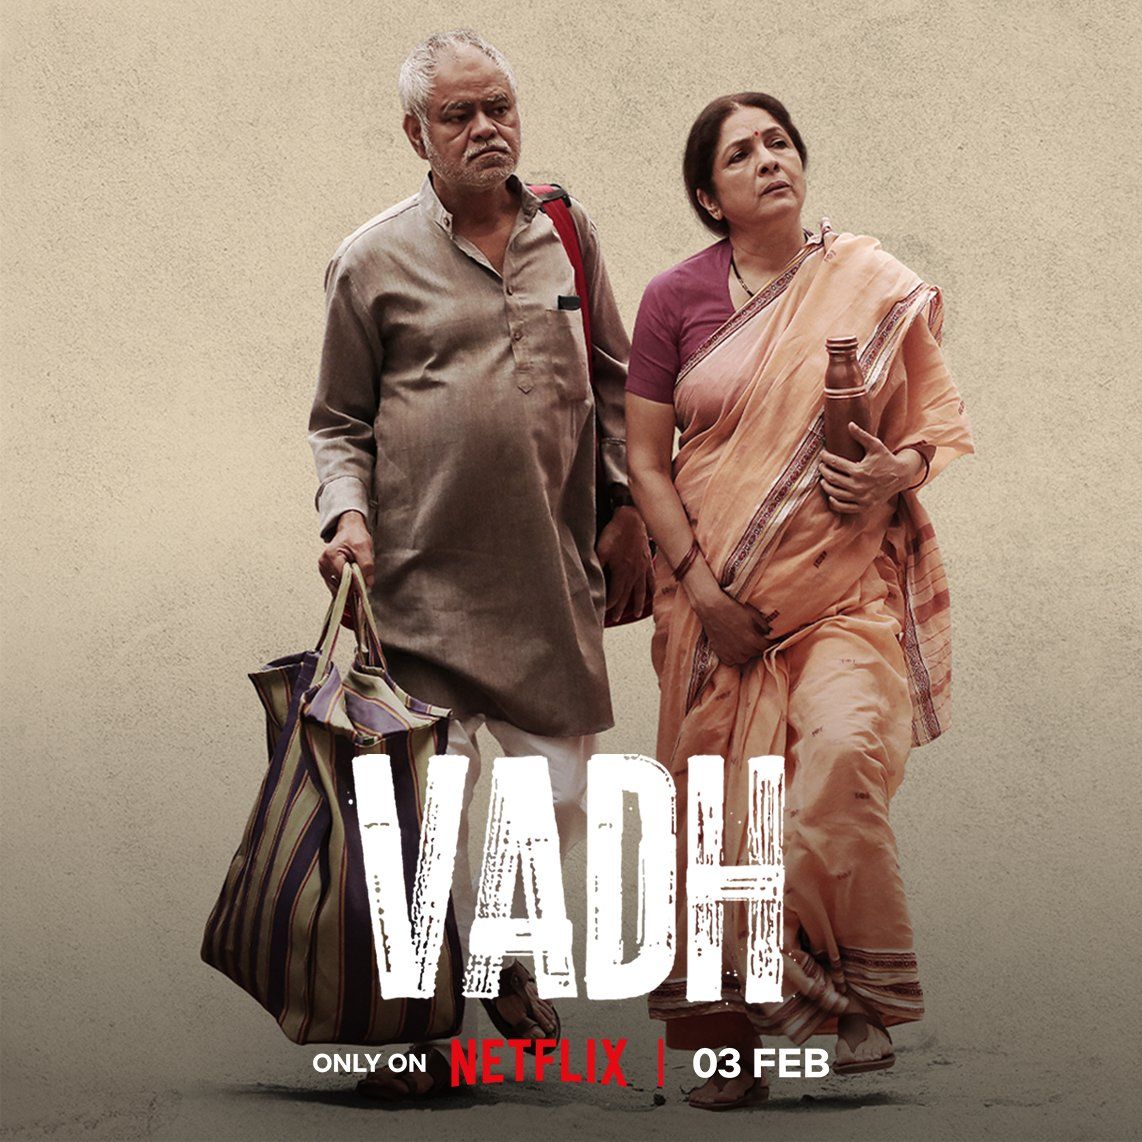 #RajeevBarnwal & #JaspalSingh just wow 🔥
Brilliantly shot, directed & written 

#ManavVij #SaurabhSachdeva #SanjayMishra 
Absolutely mind blowing performances played by these three actors 

#Vadh one of the greatest thriller in the decade